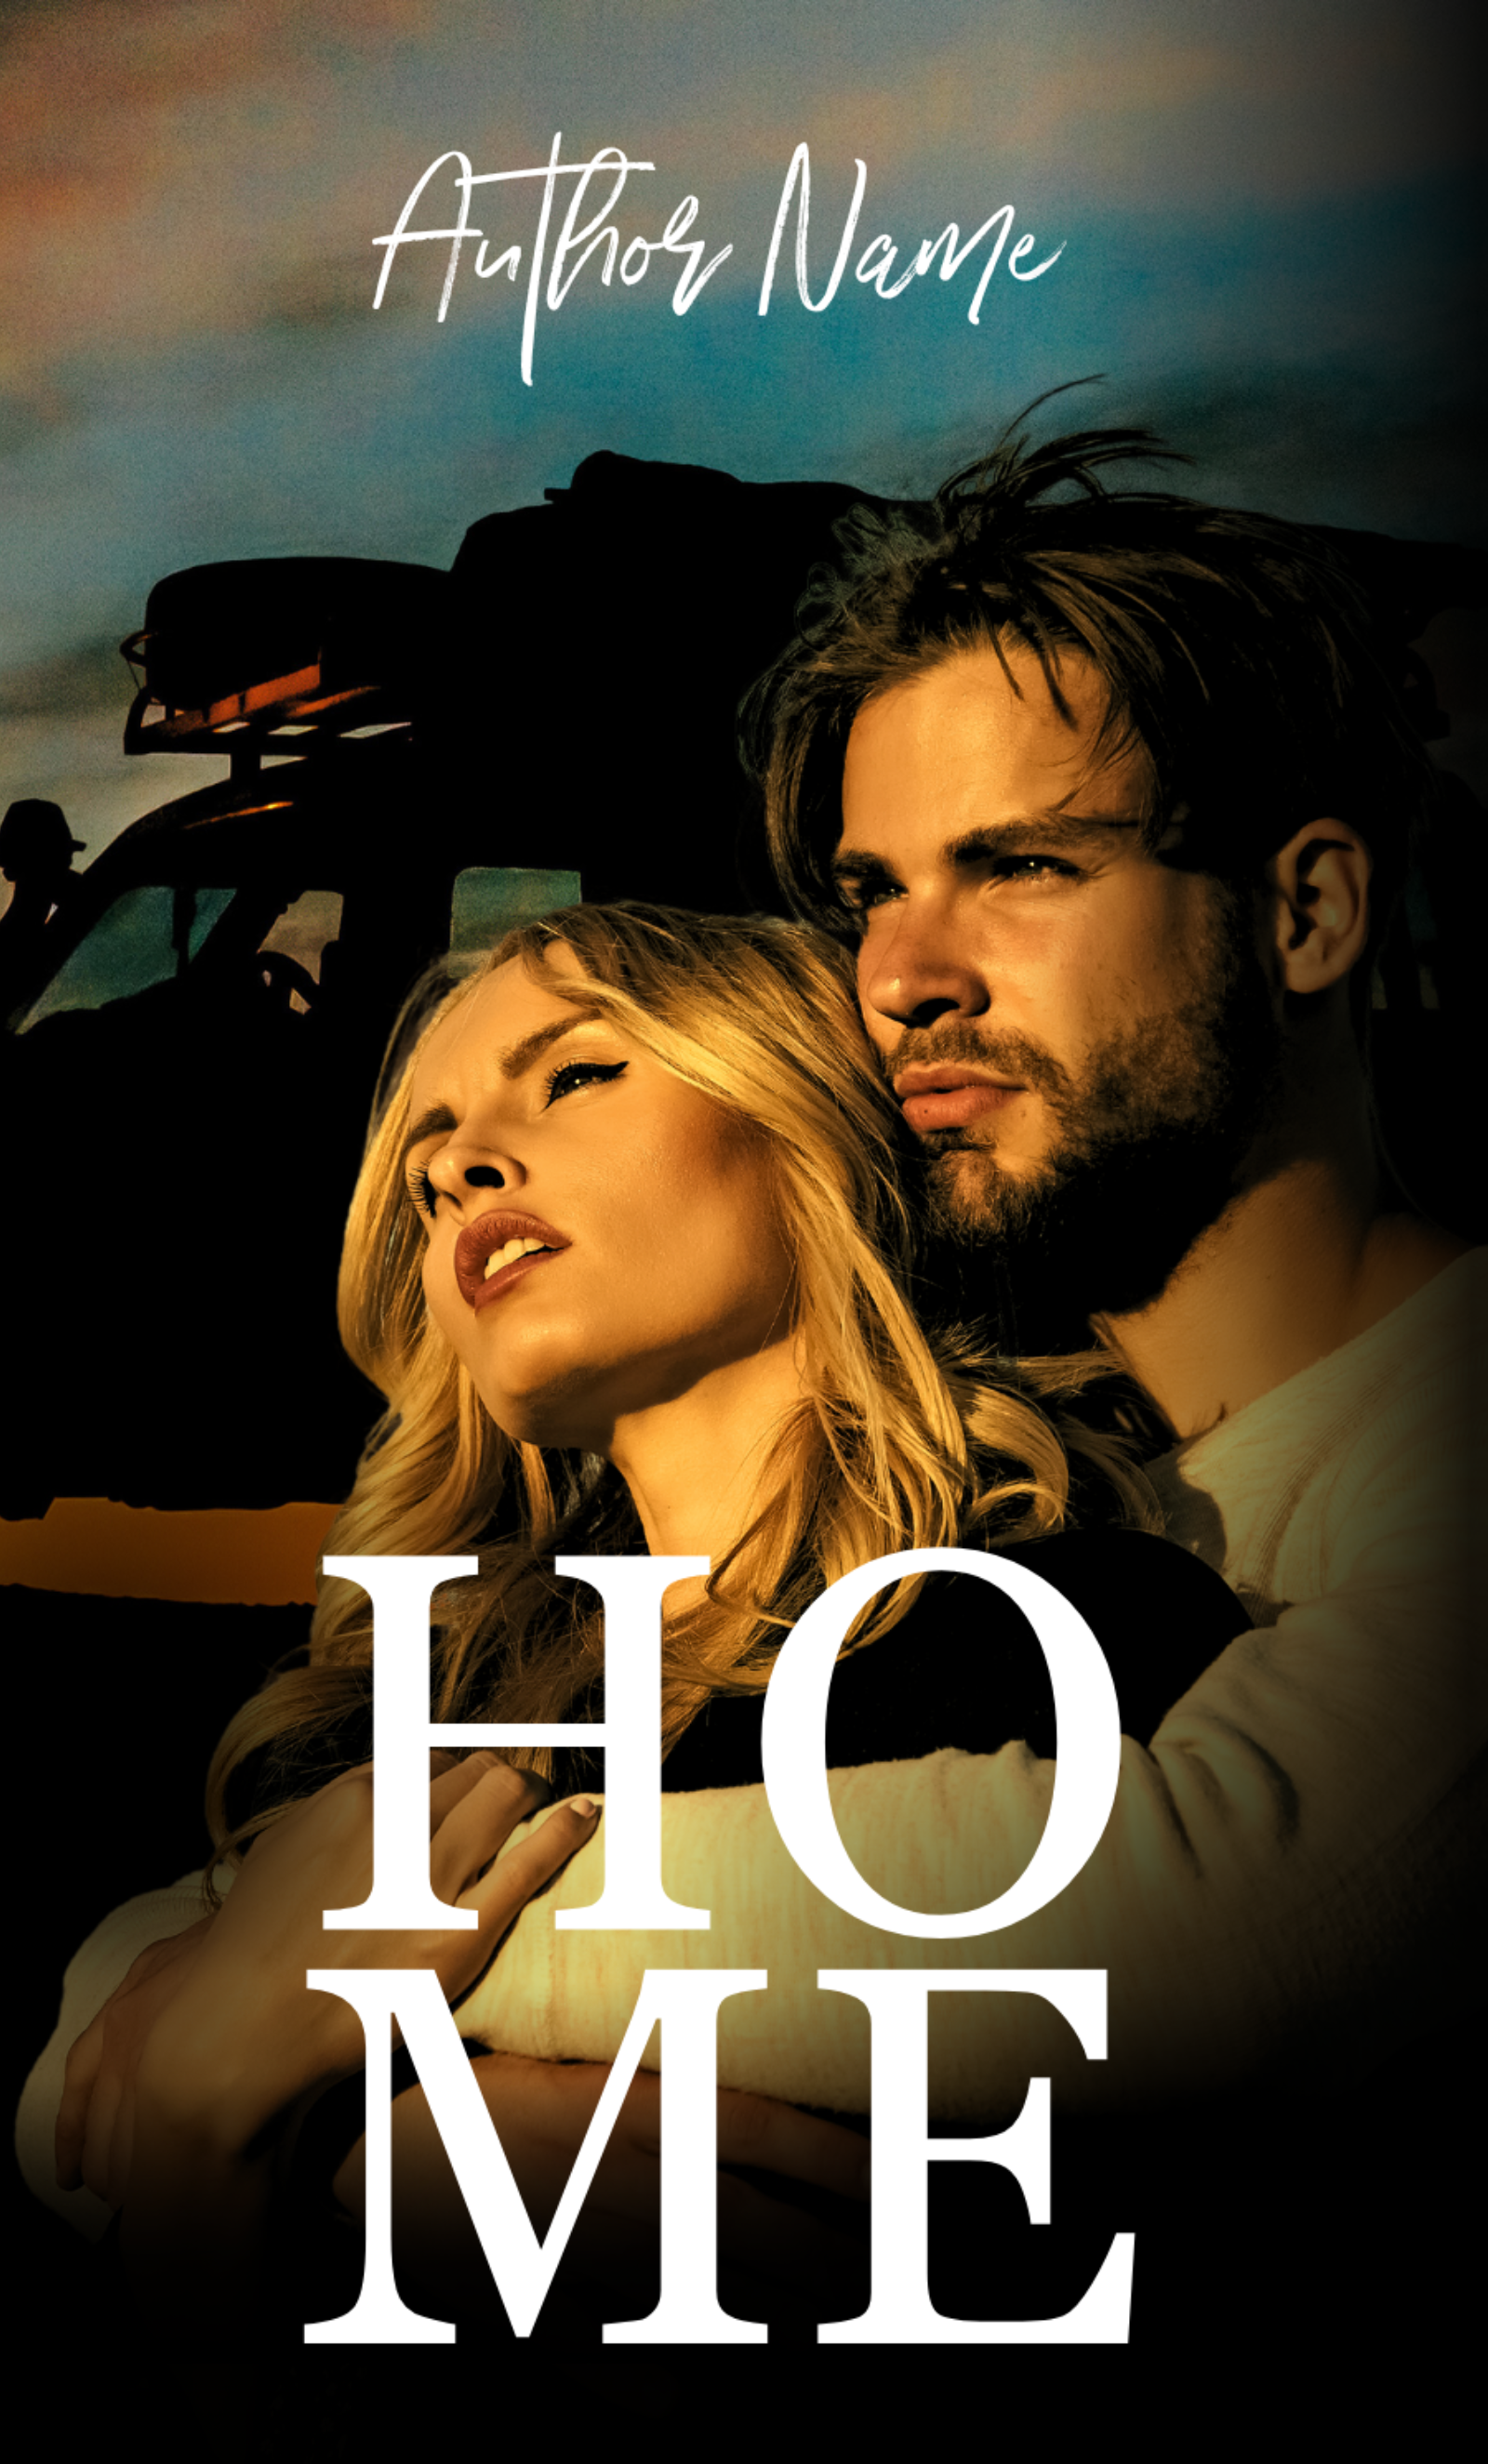 A romantic book cover titled "HOME" by Karen Barnett showing a couple embracing at sunset. The woman, with blonde hair, leans against the man, who has dark hair and a beard. In the background, there is a silhouette of an off-road vehicle. The author's name is written at the top in cursive. BookSelf Book Cover Design & Premade Book Covers